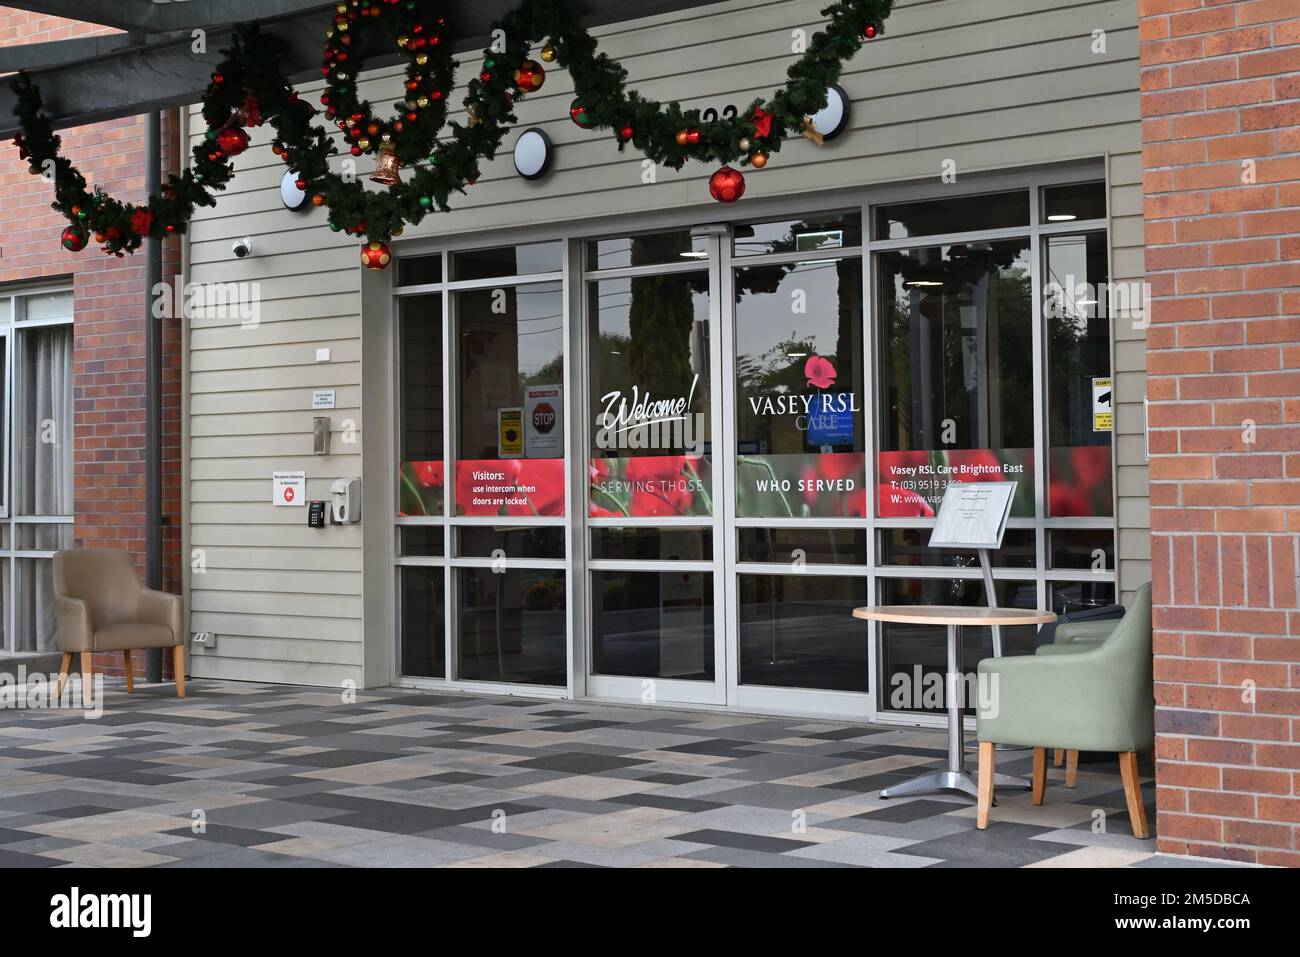 Front entrance to Vasey RSL Care, located on Hawthorn Rd, with Christmas decorations above the doorway Stock Photo